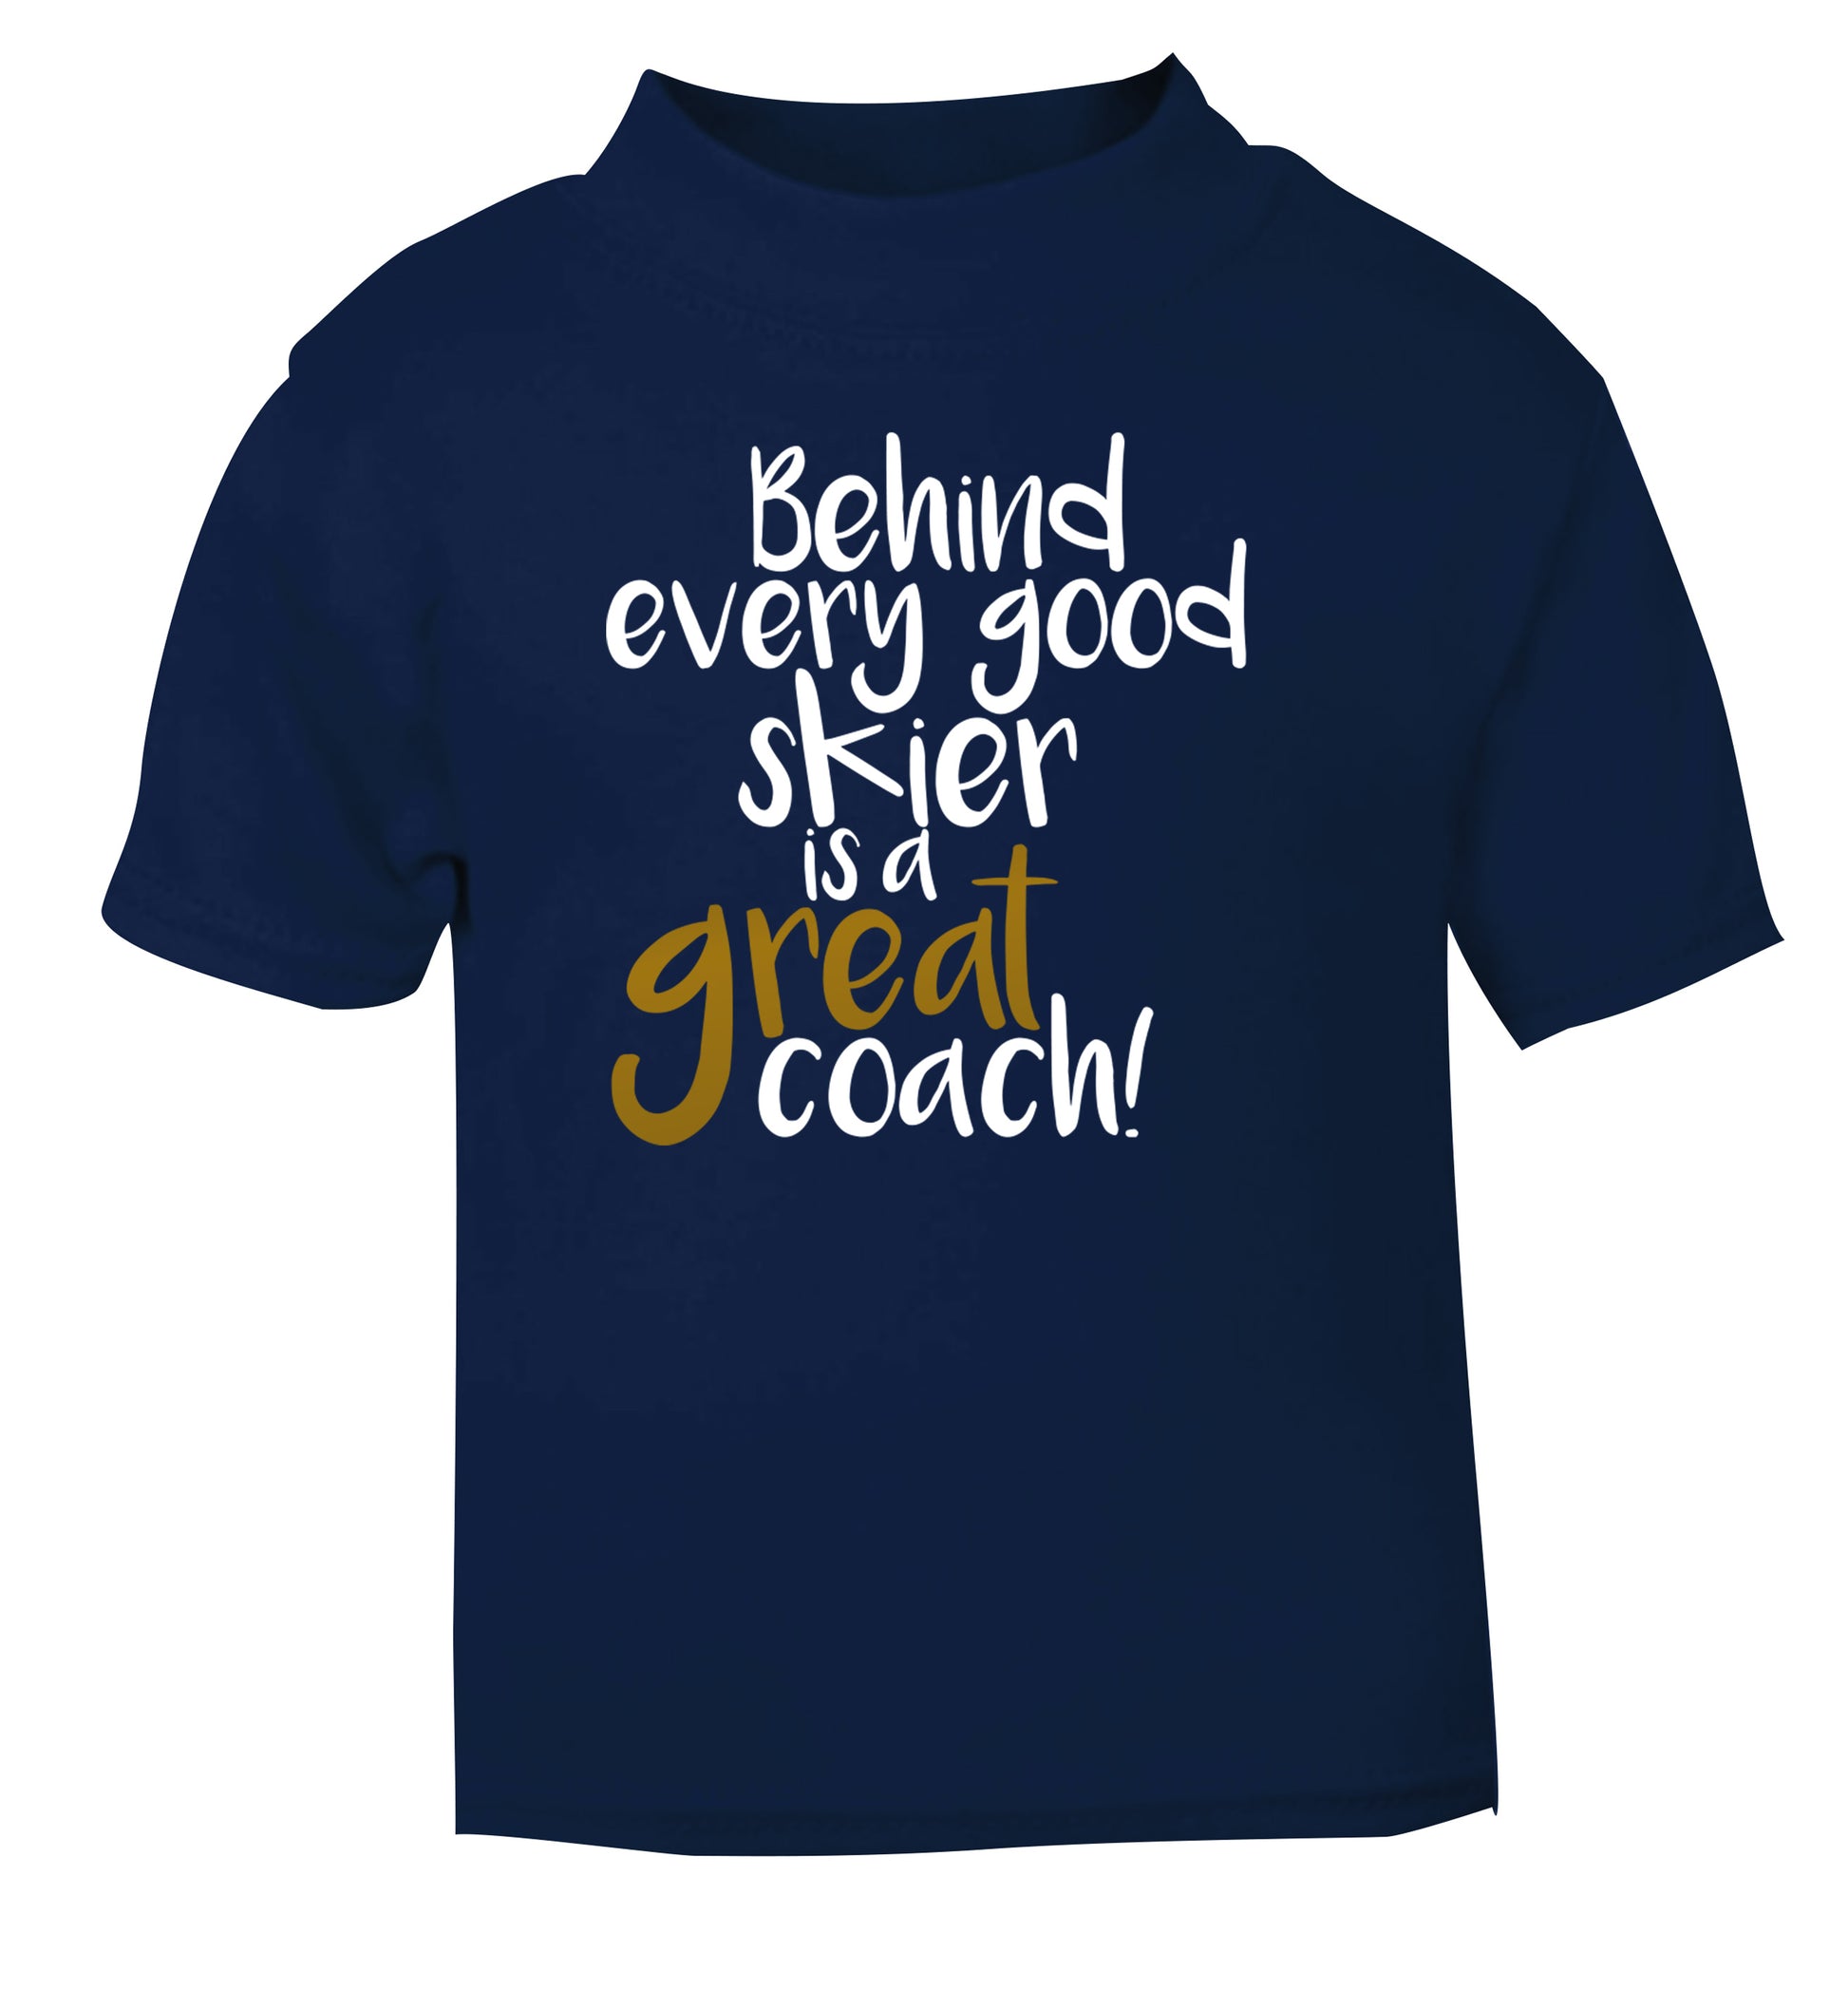 Behind every good skier is a great coach! navy Baby Toddler Tshirt 2 Years